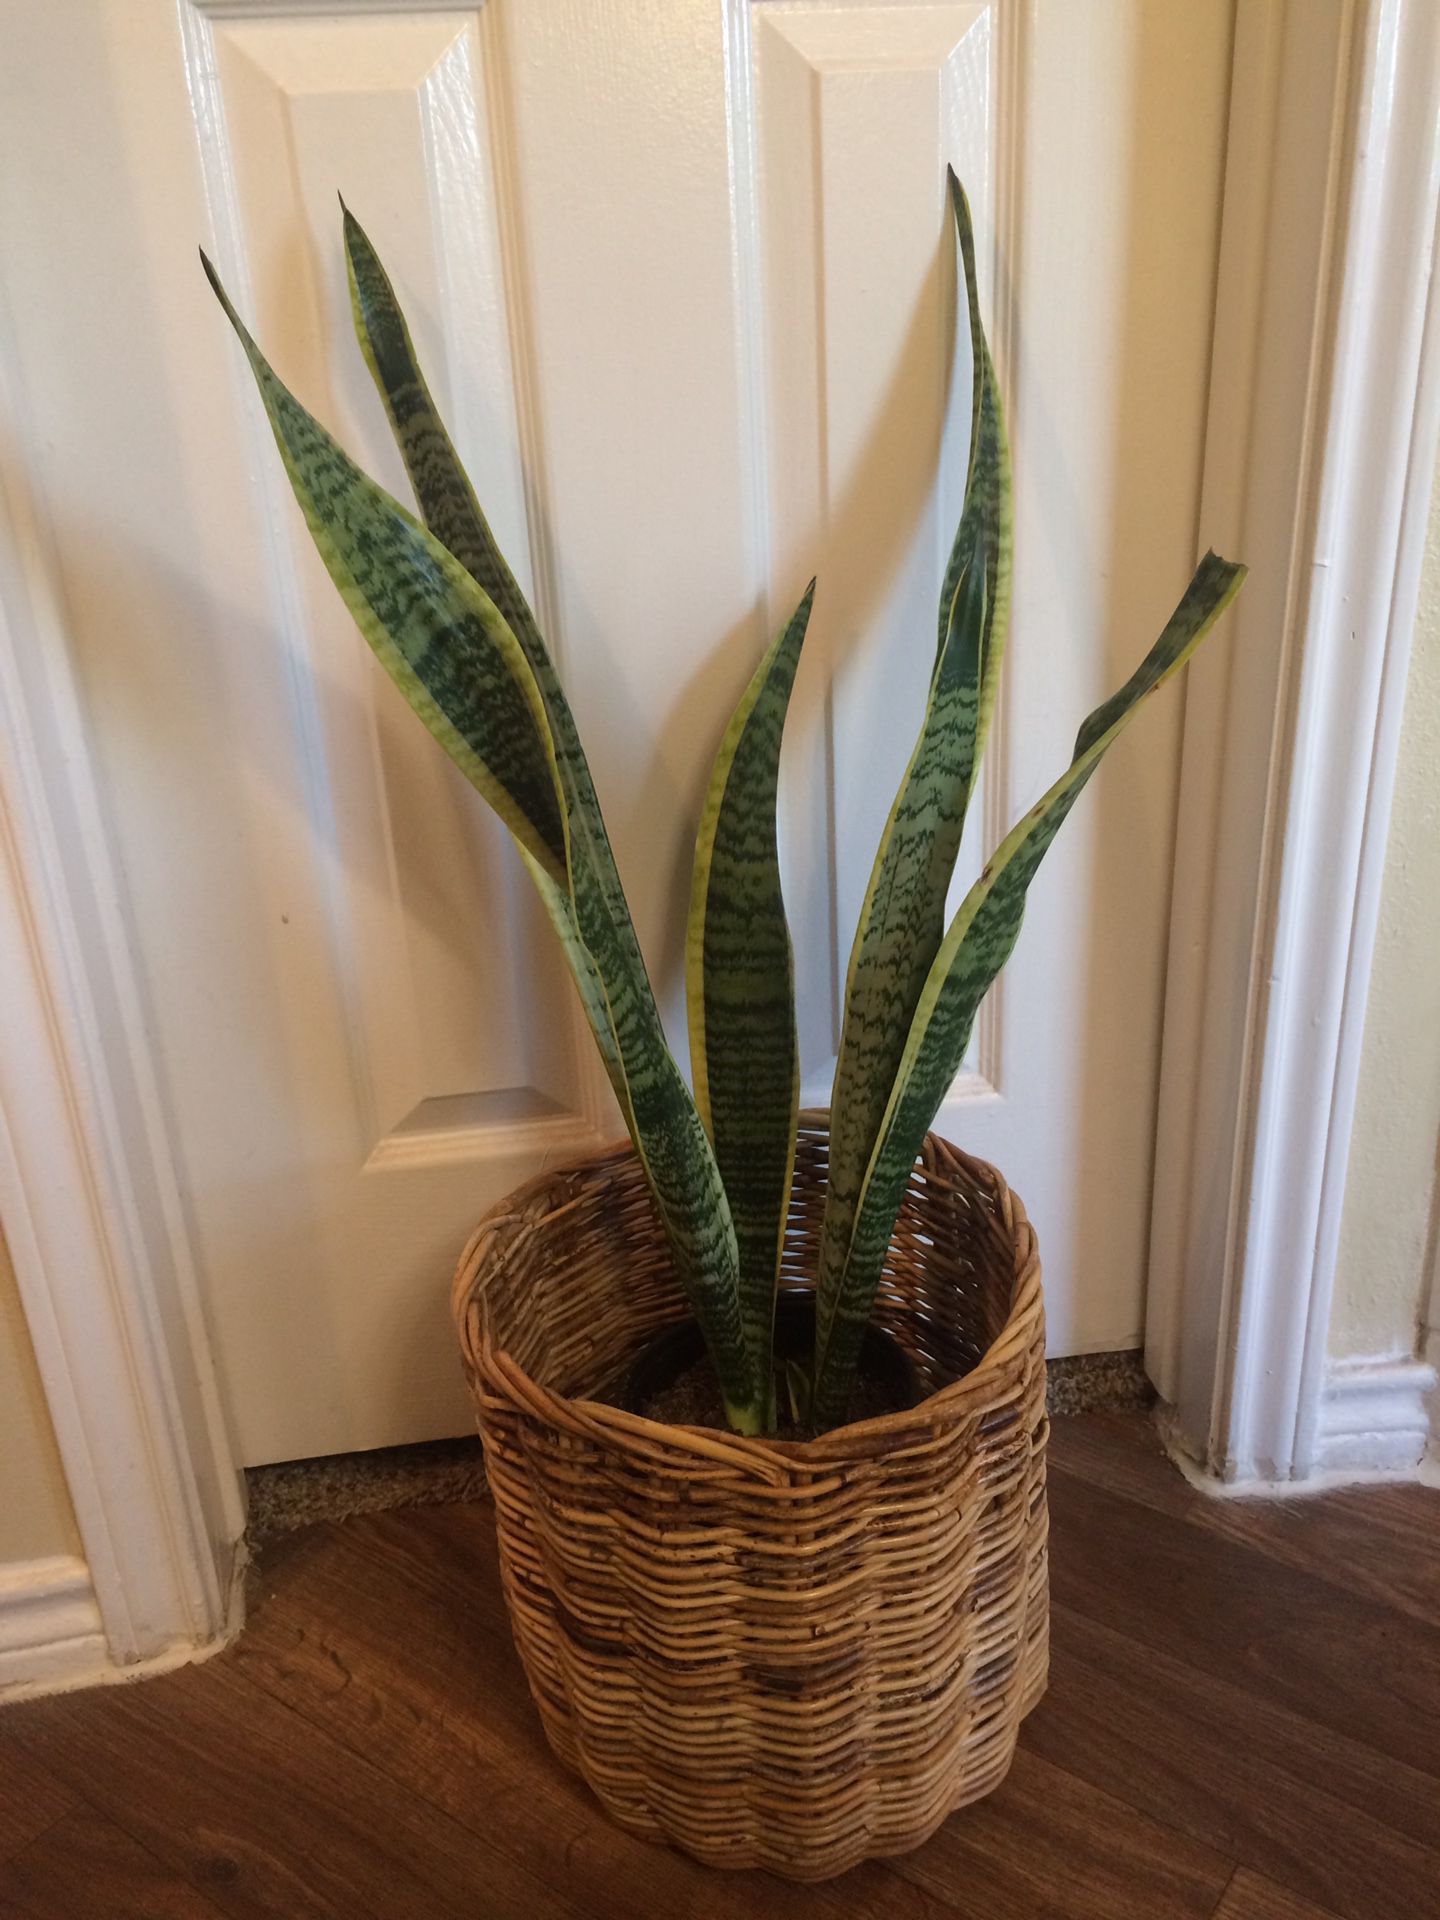 sansevieria/snake plant/ mother-in-law’s tongue